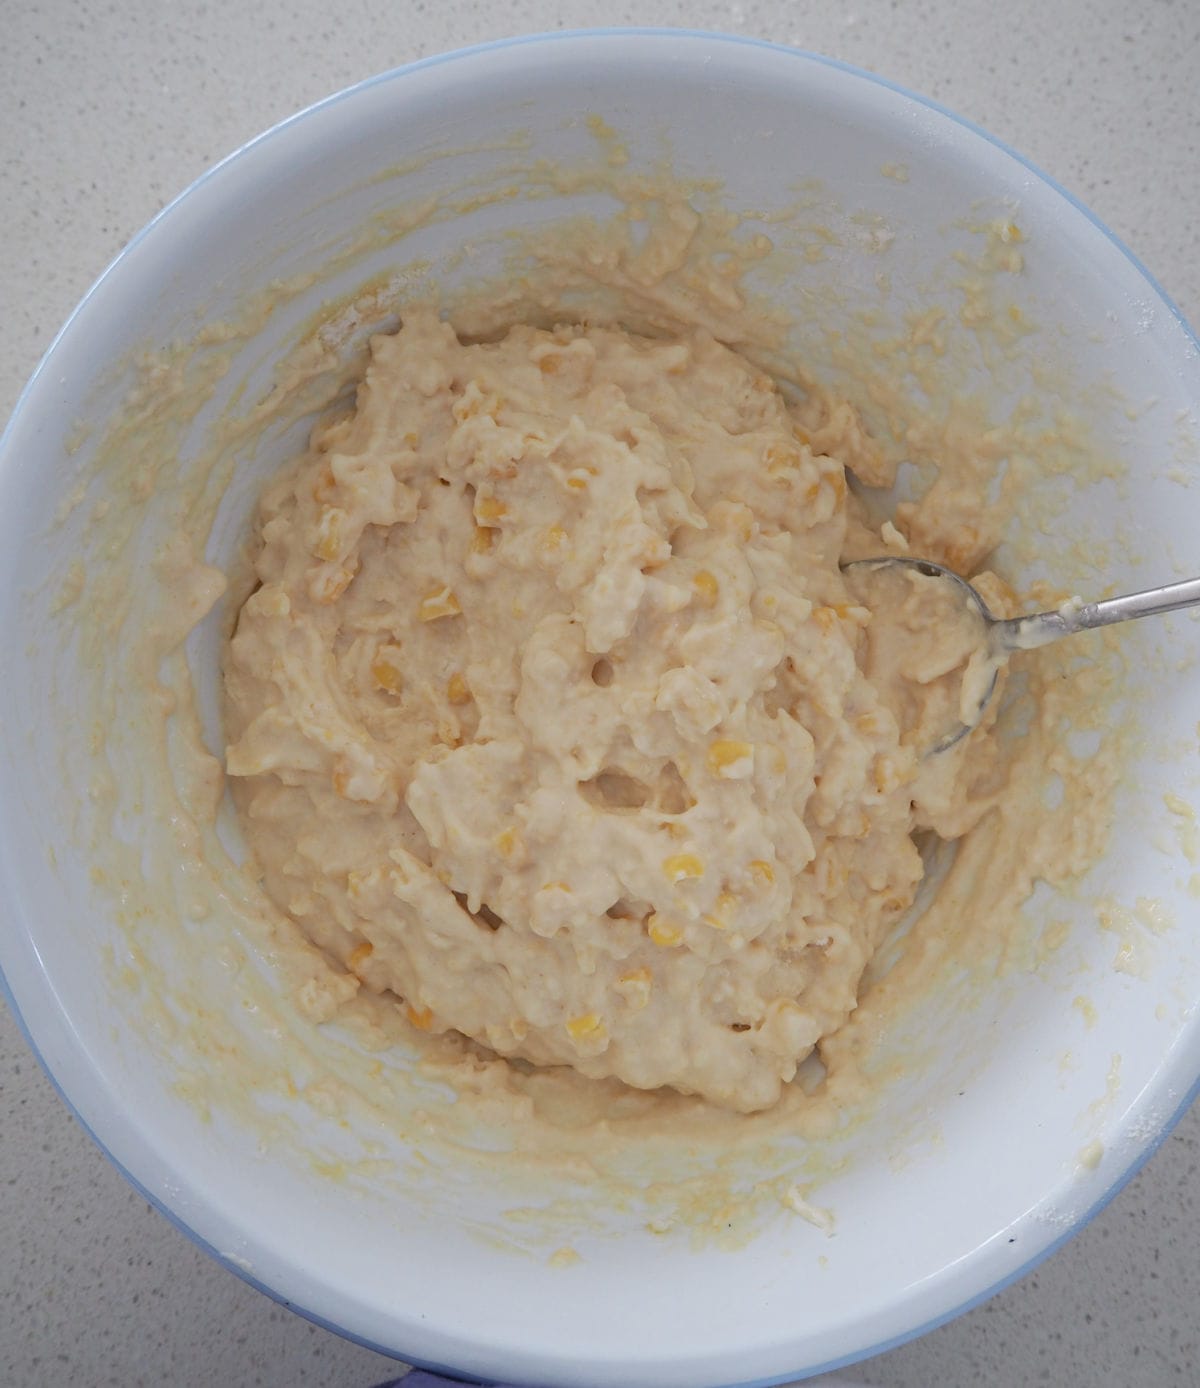 Cheese and corn muffin mixture combined in a white bowl.